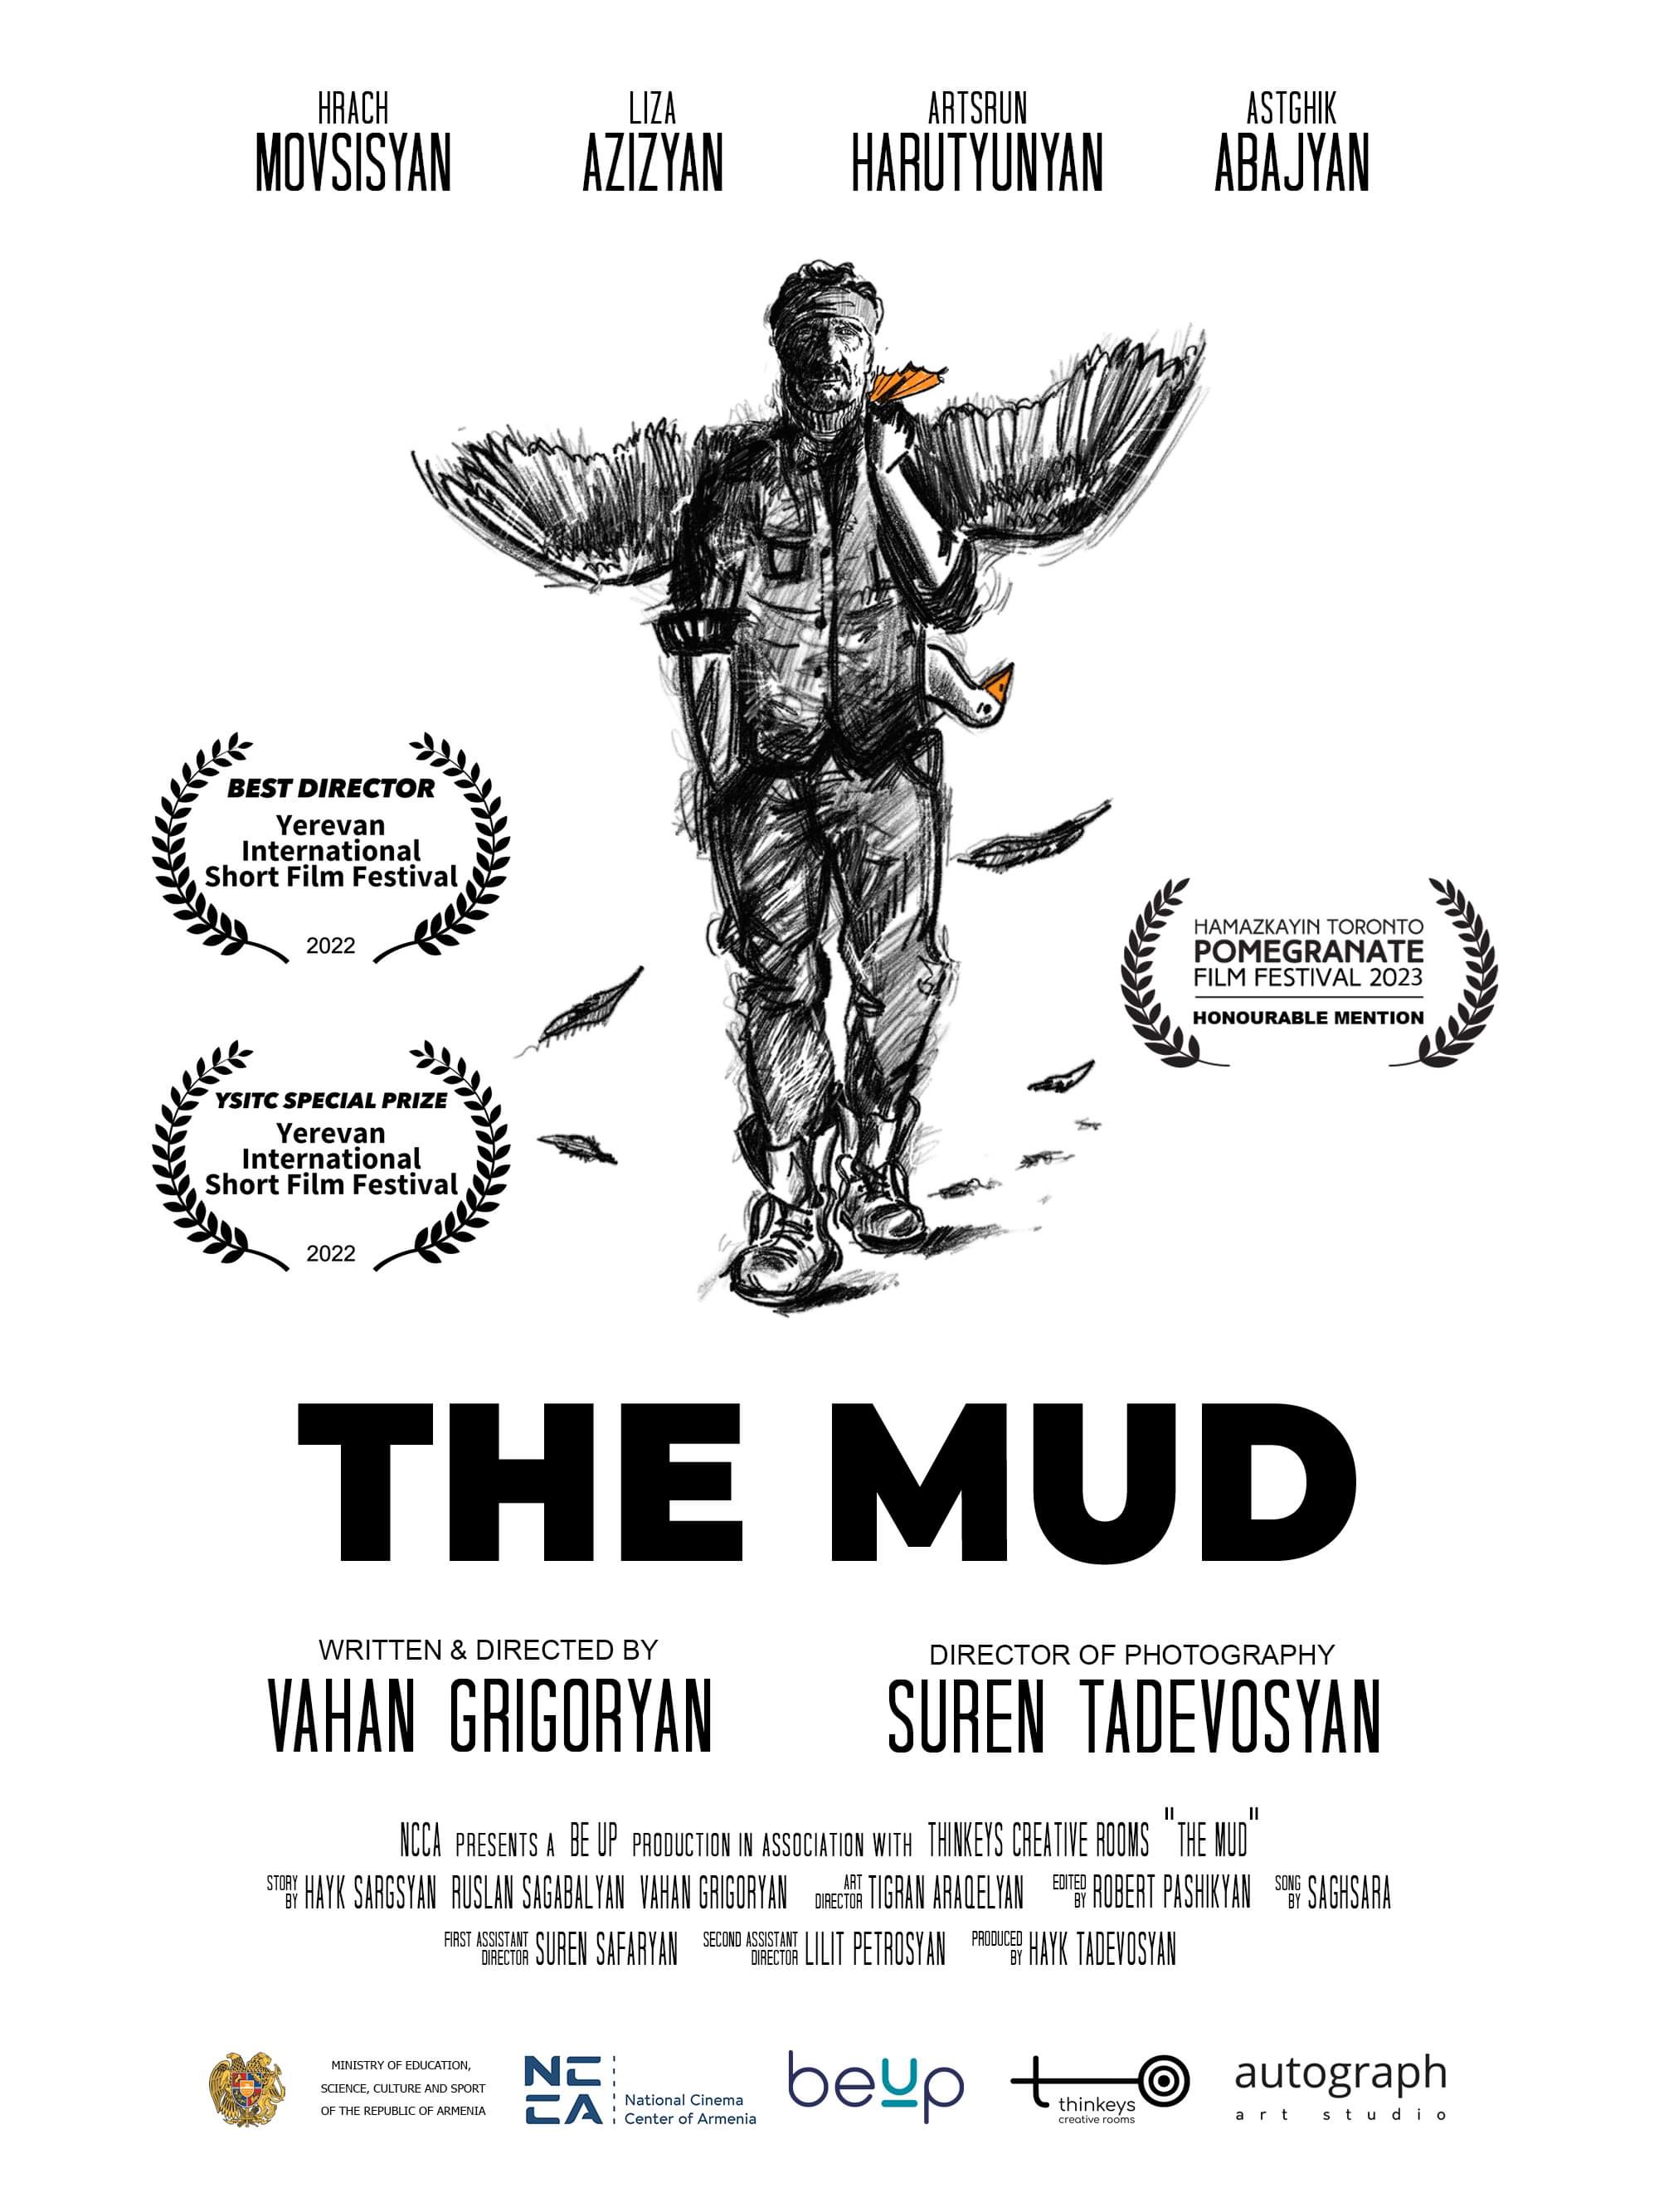 The Mud_Official poster.JPG (554 KB)